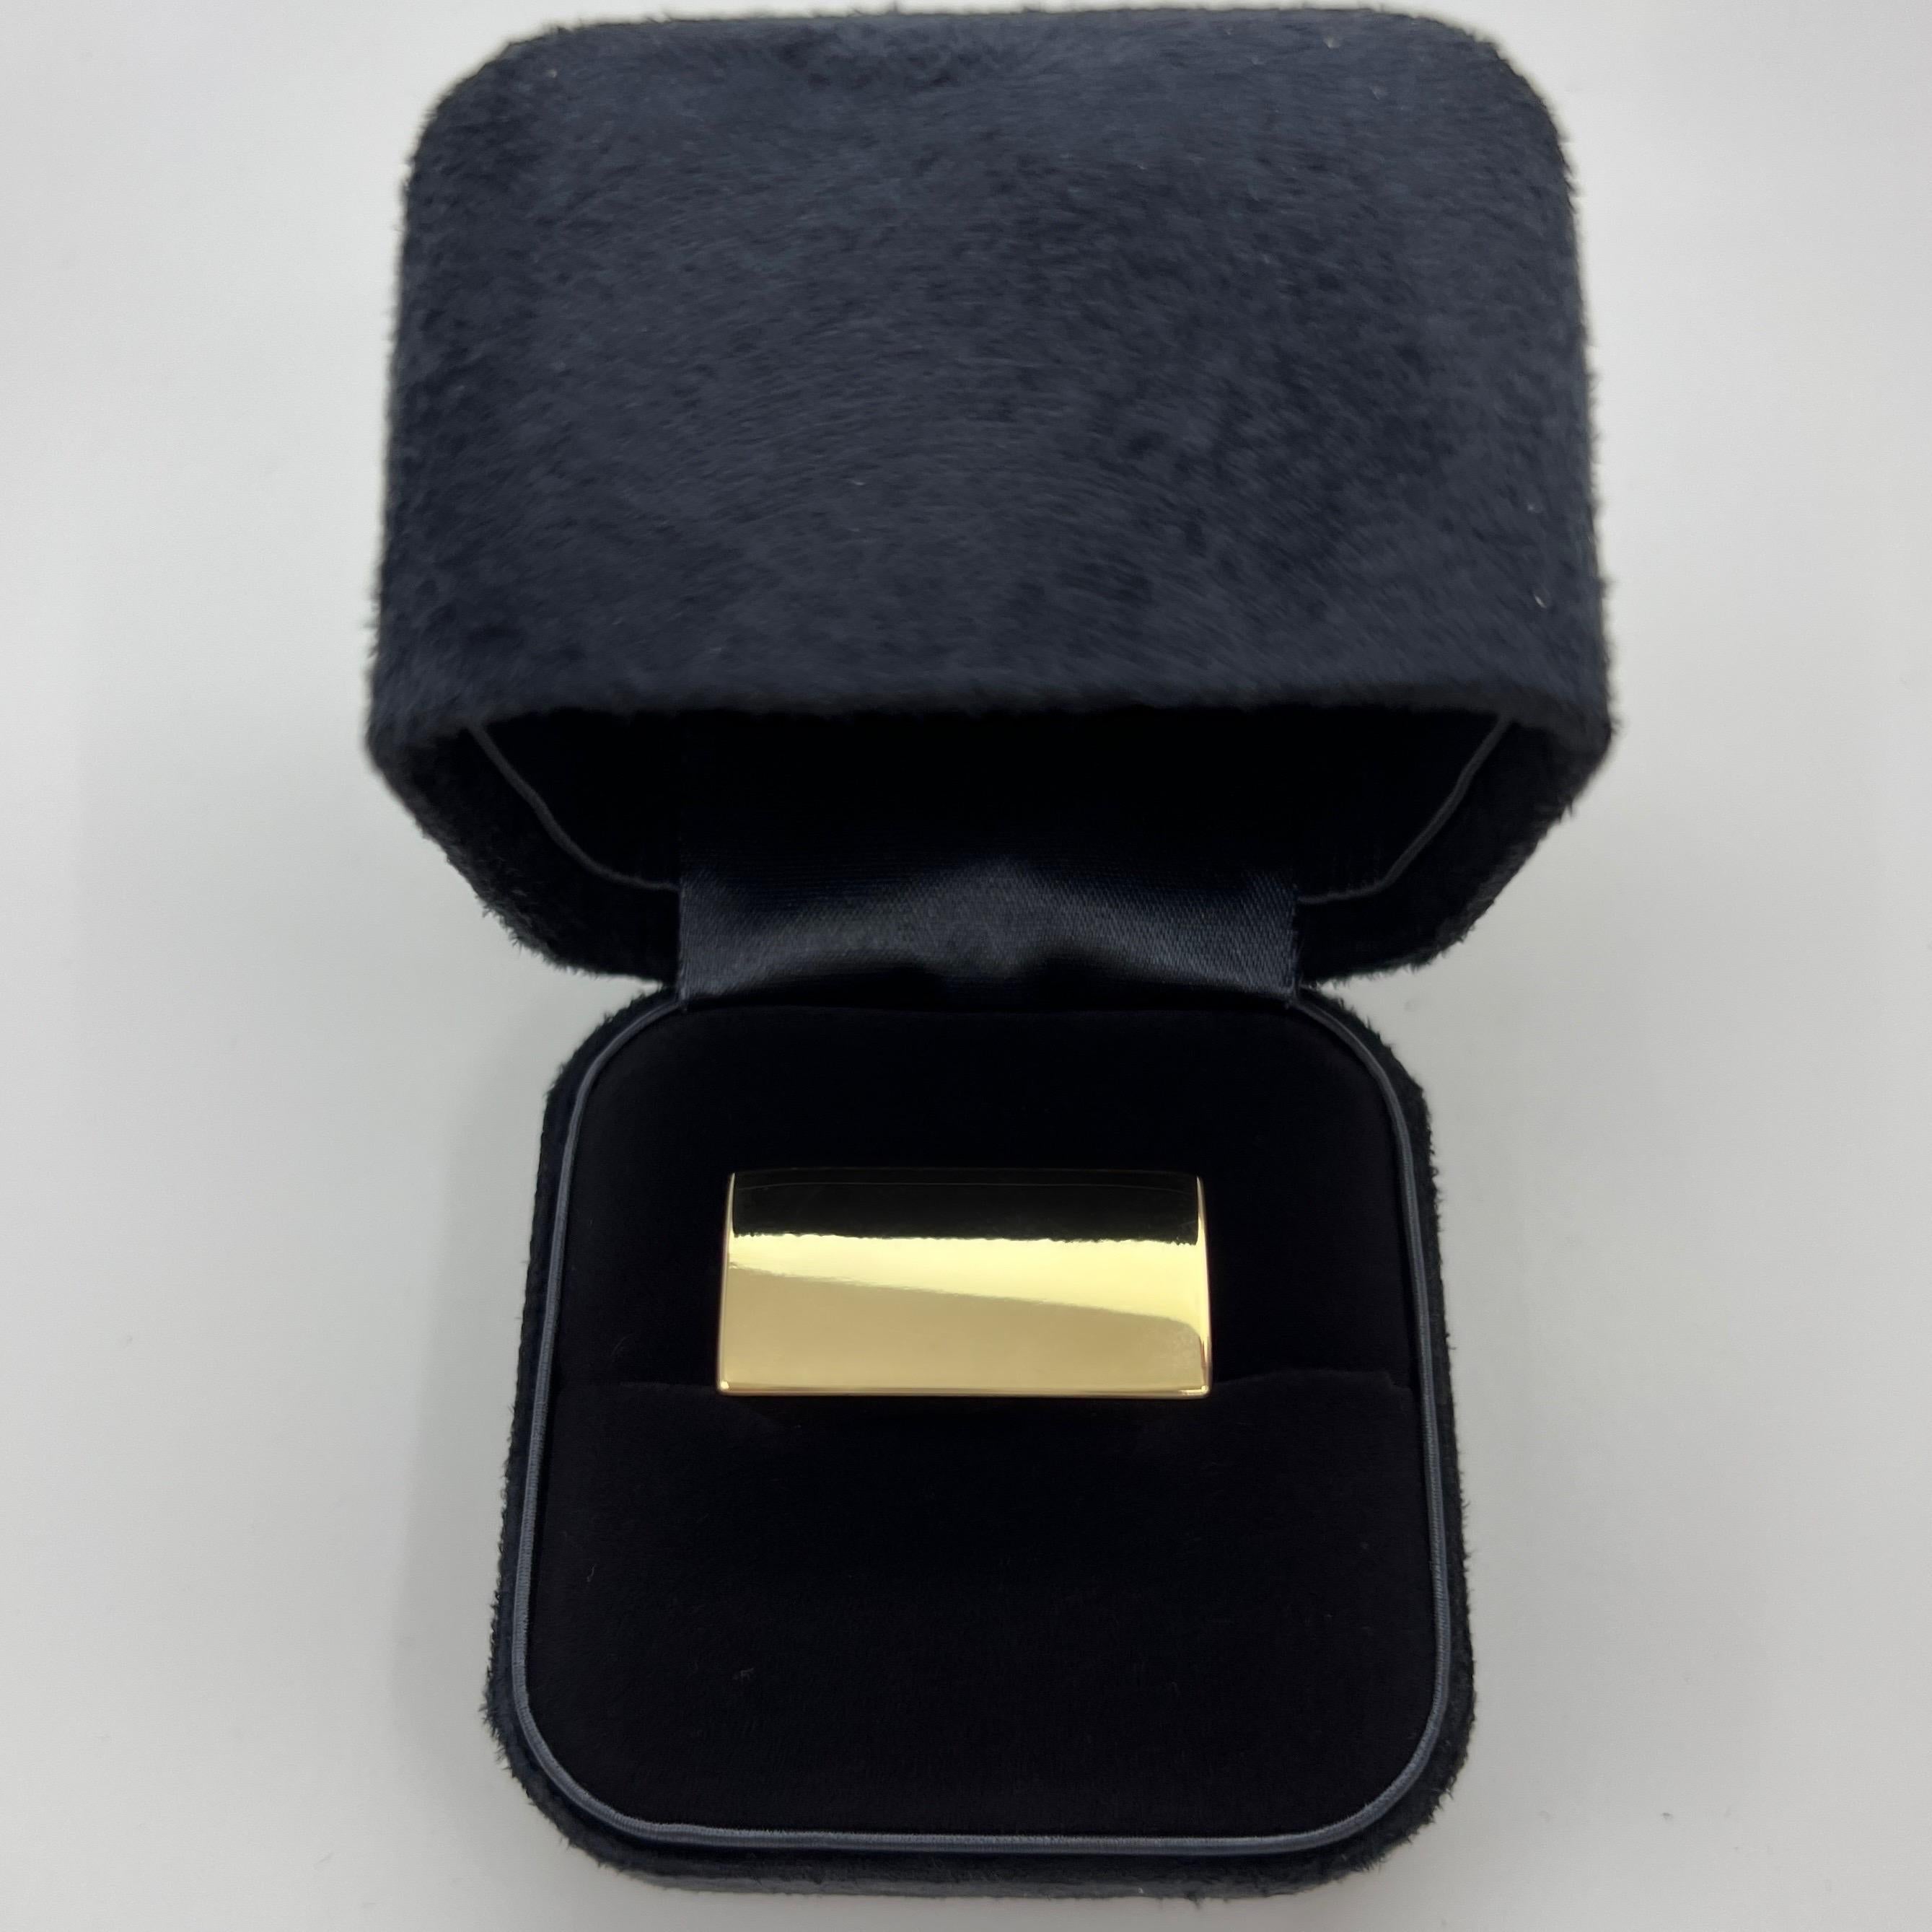 Rare Tiffany & Co. 18k Yellow Gold Bold Statement Rectangle Ring

A beautifully made yellow gold ring with large rectangle top. This piece is a rare bold statement ring by Tiffany & Co. Made in Italy.

The ring is hallmarked/stamped Tiffany & Co.